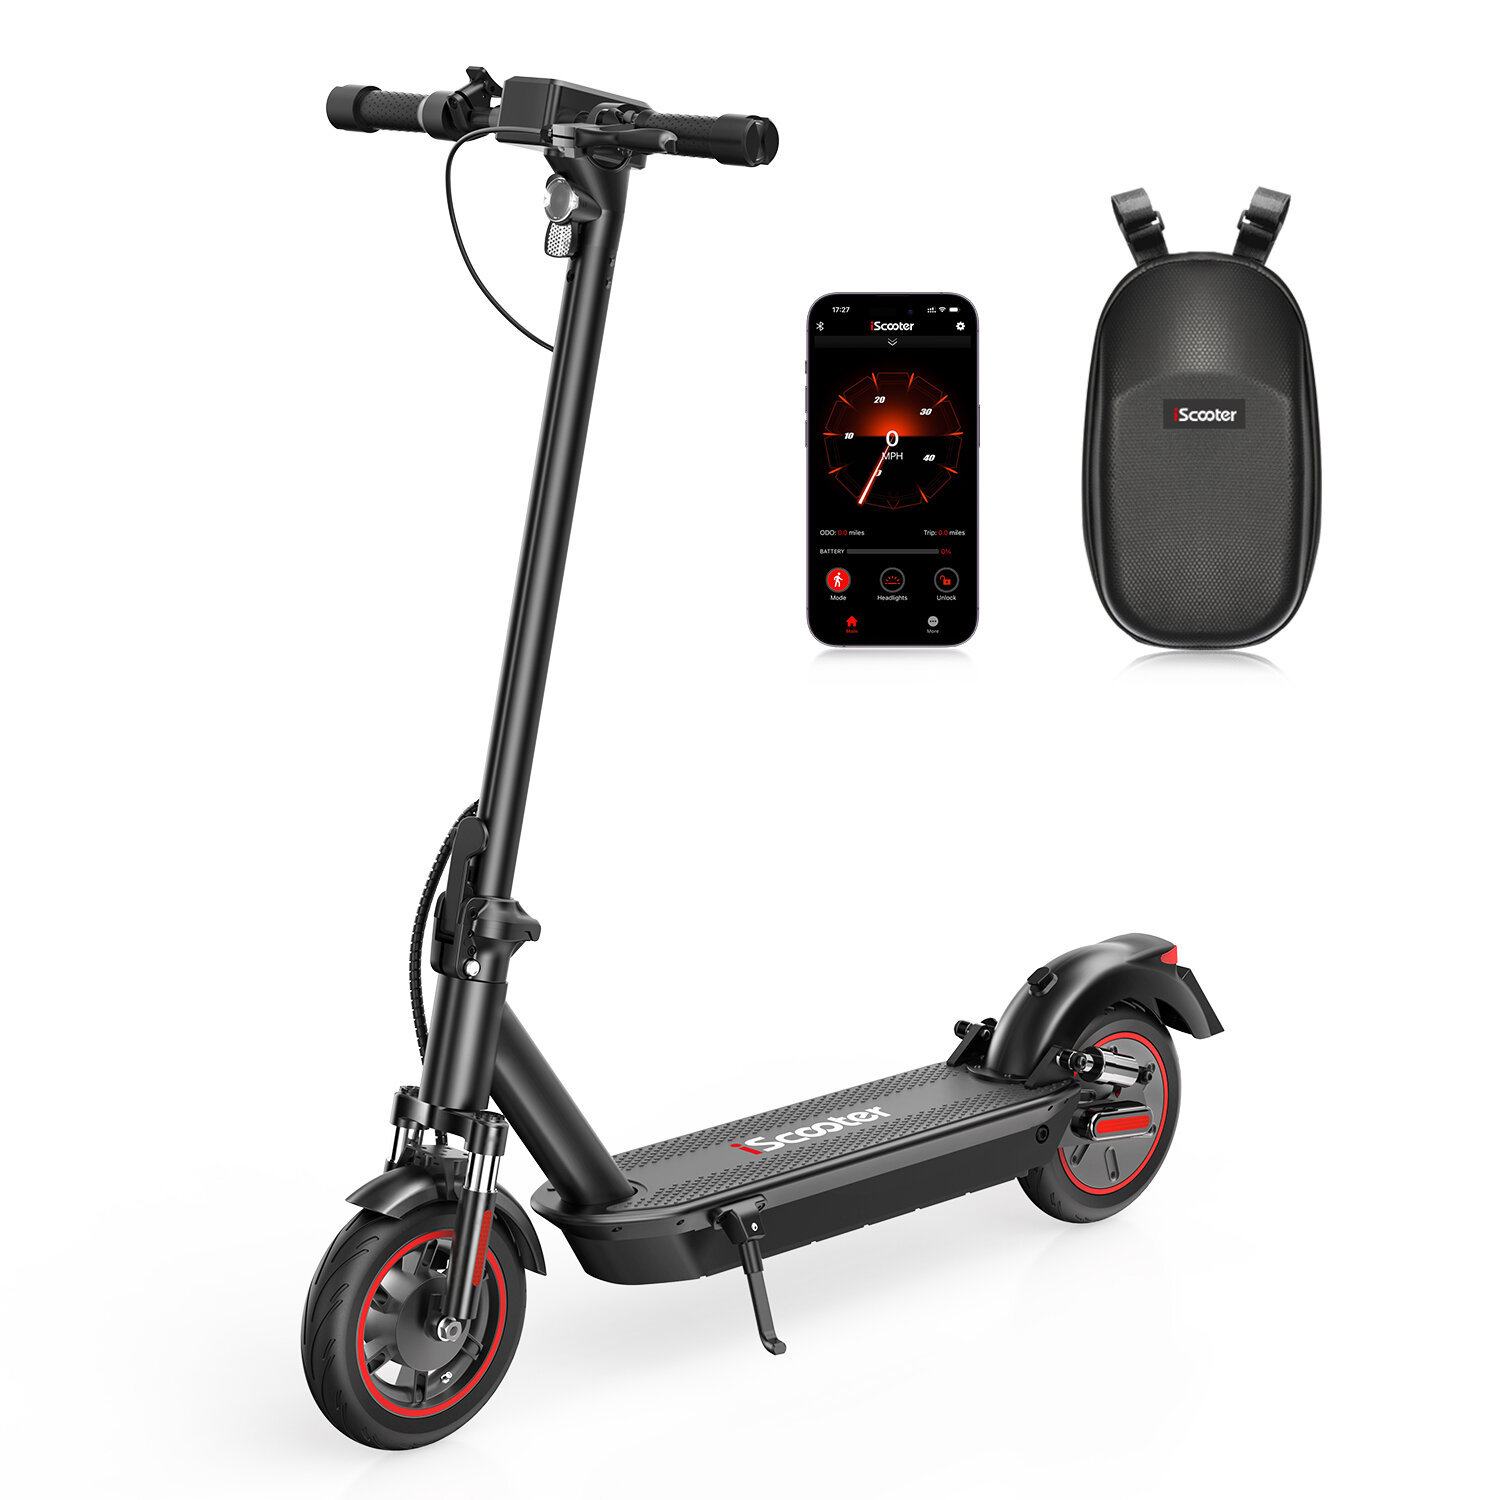 best price,iscooter,i10max,electric,scooter,15.6ah,48v,750w,10inch,eu,discount